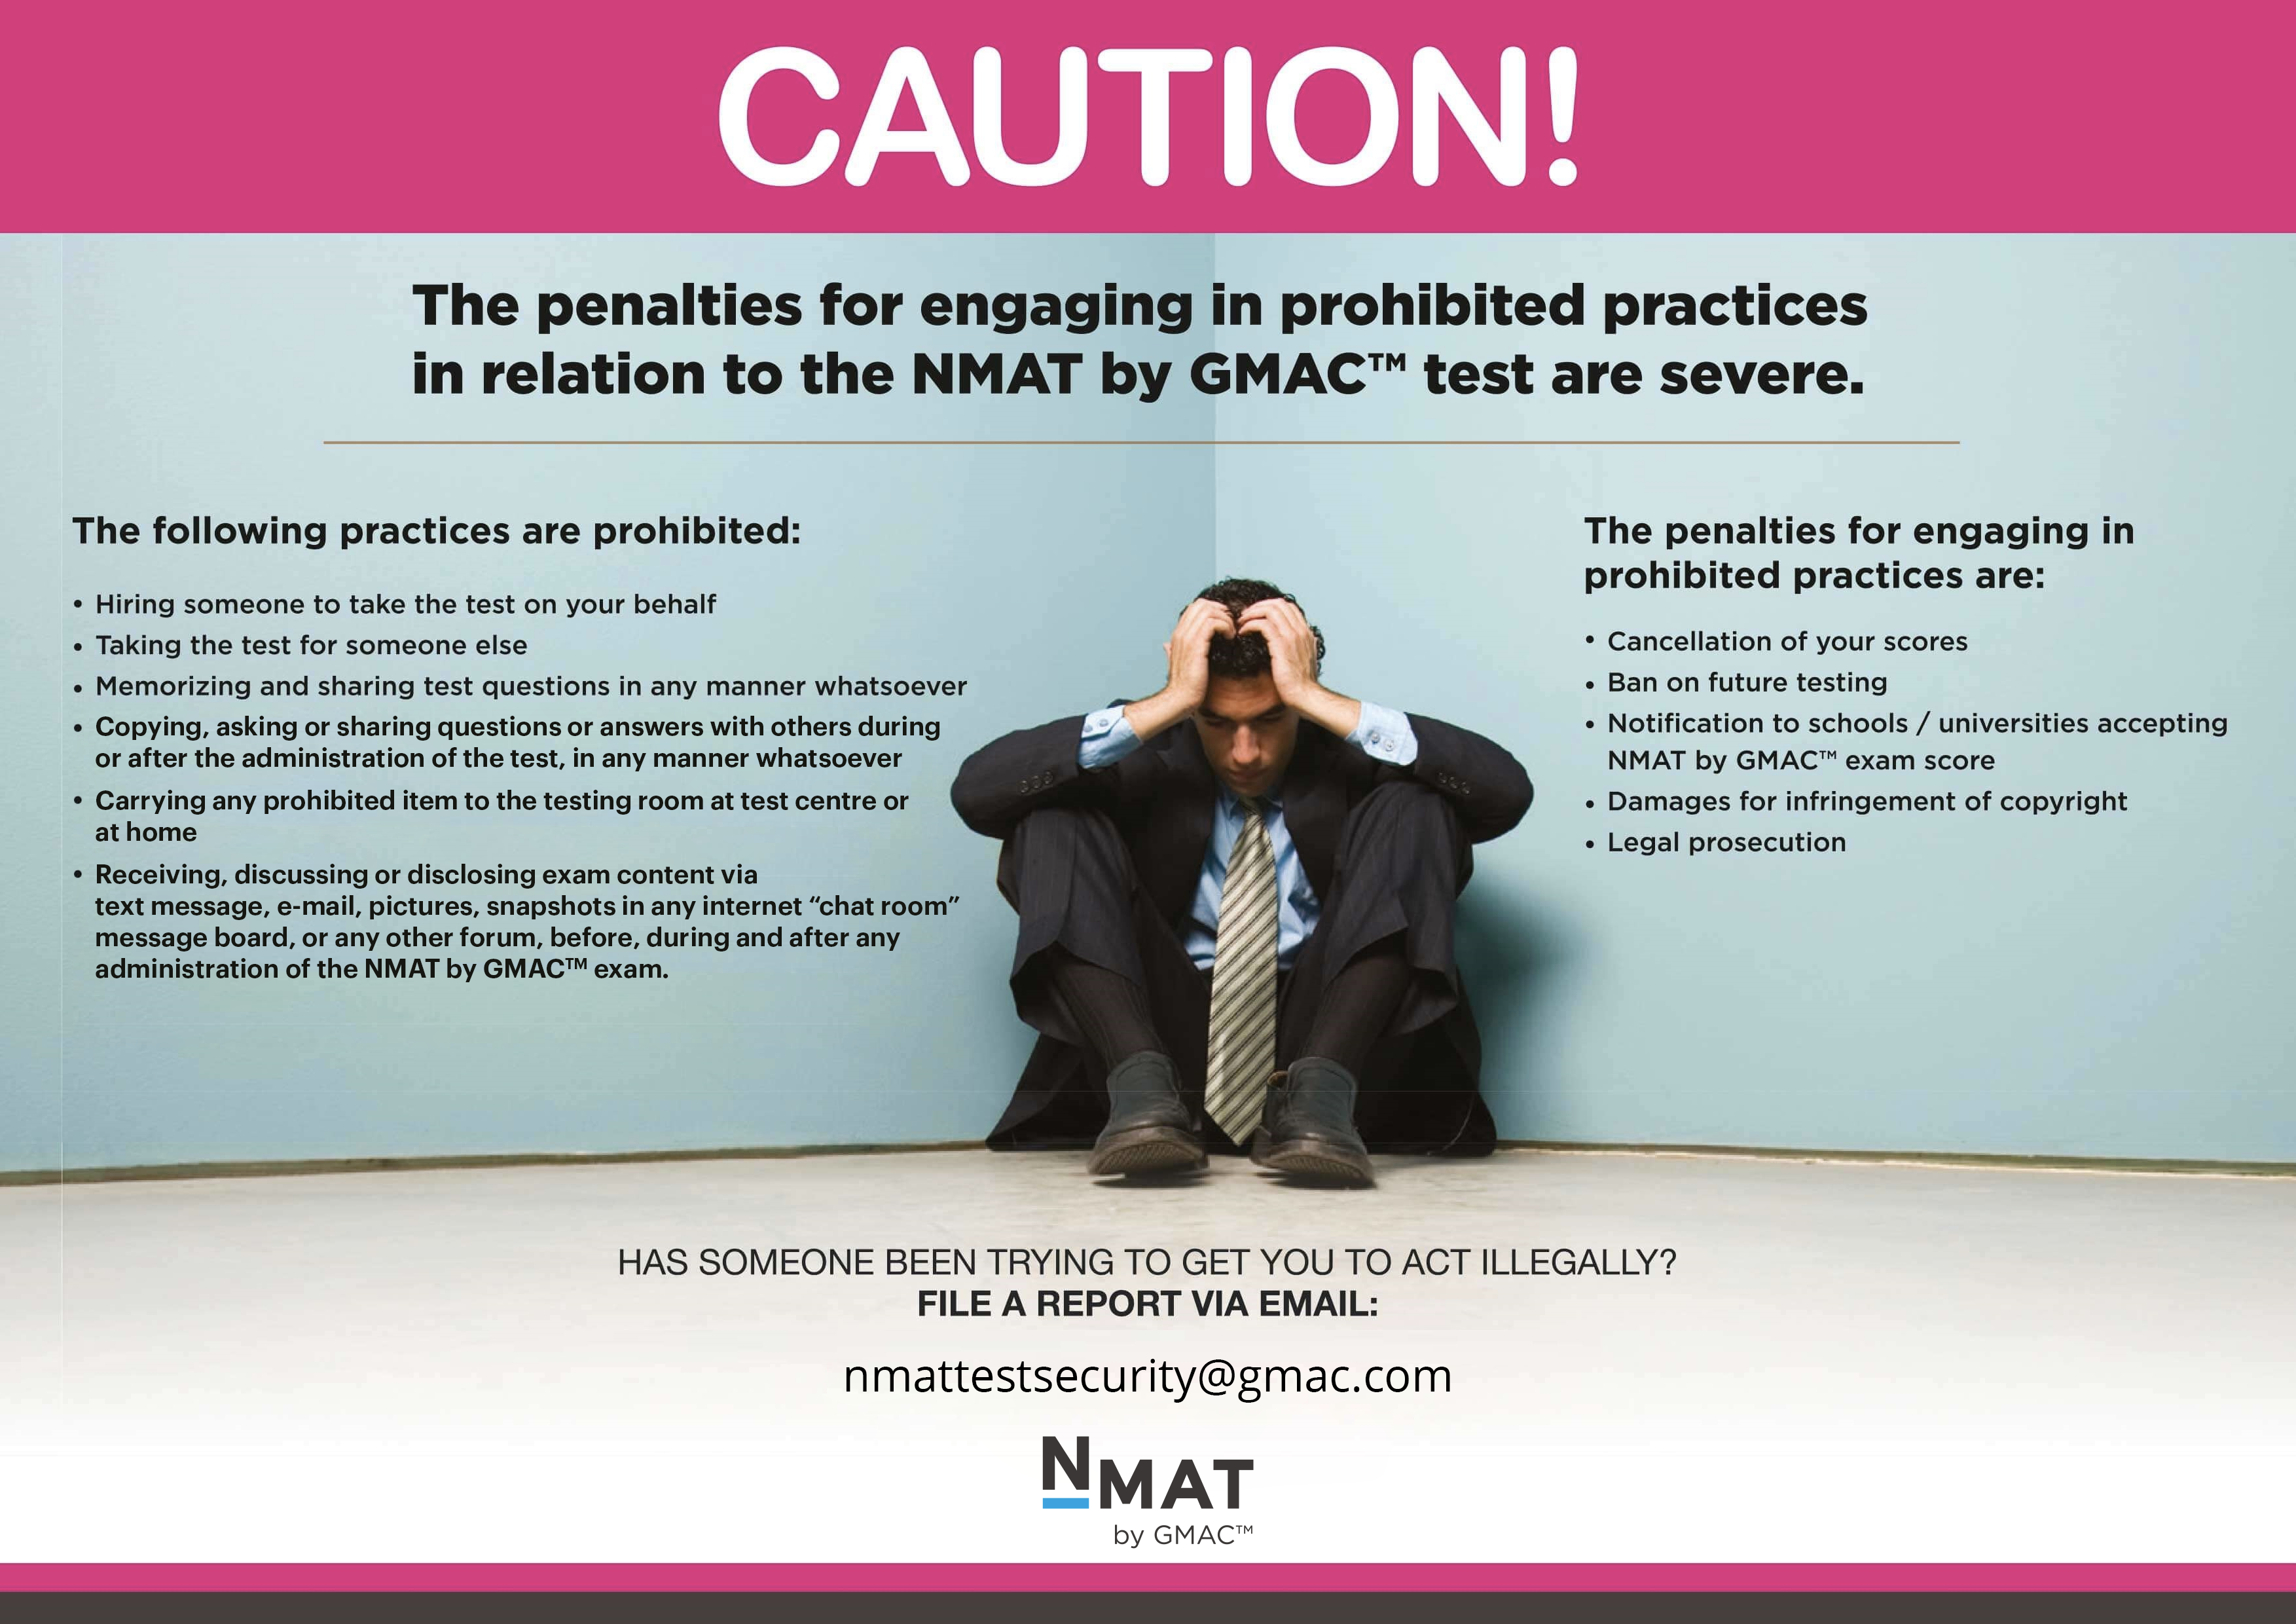 NMAT Prohibited Practices